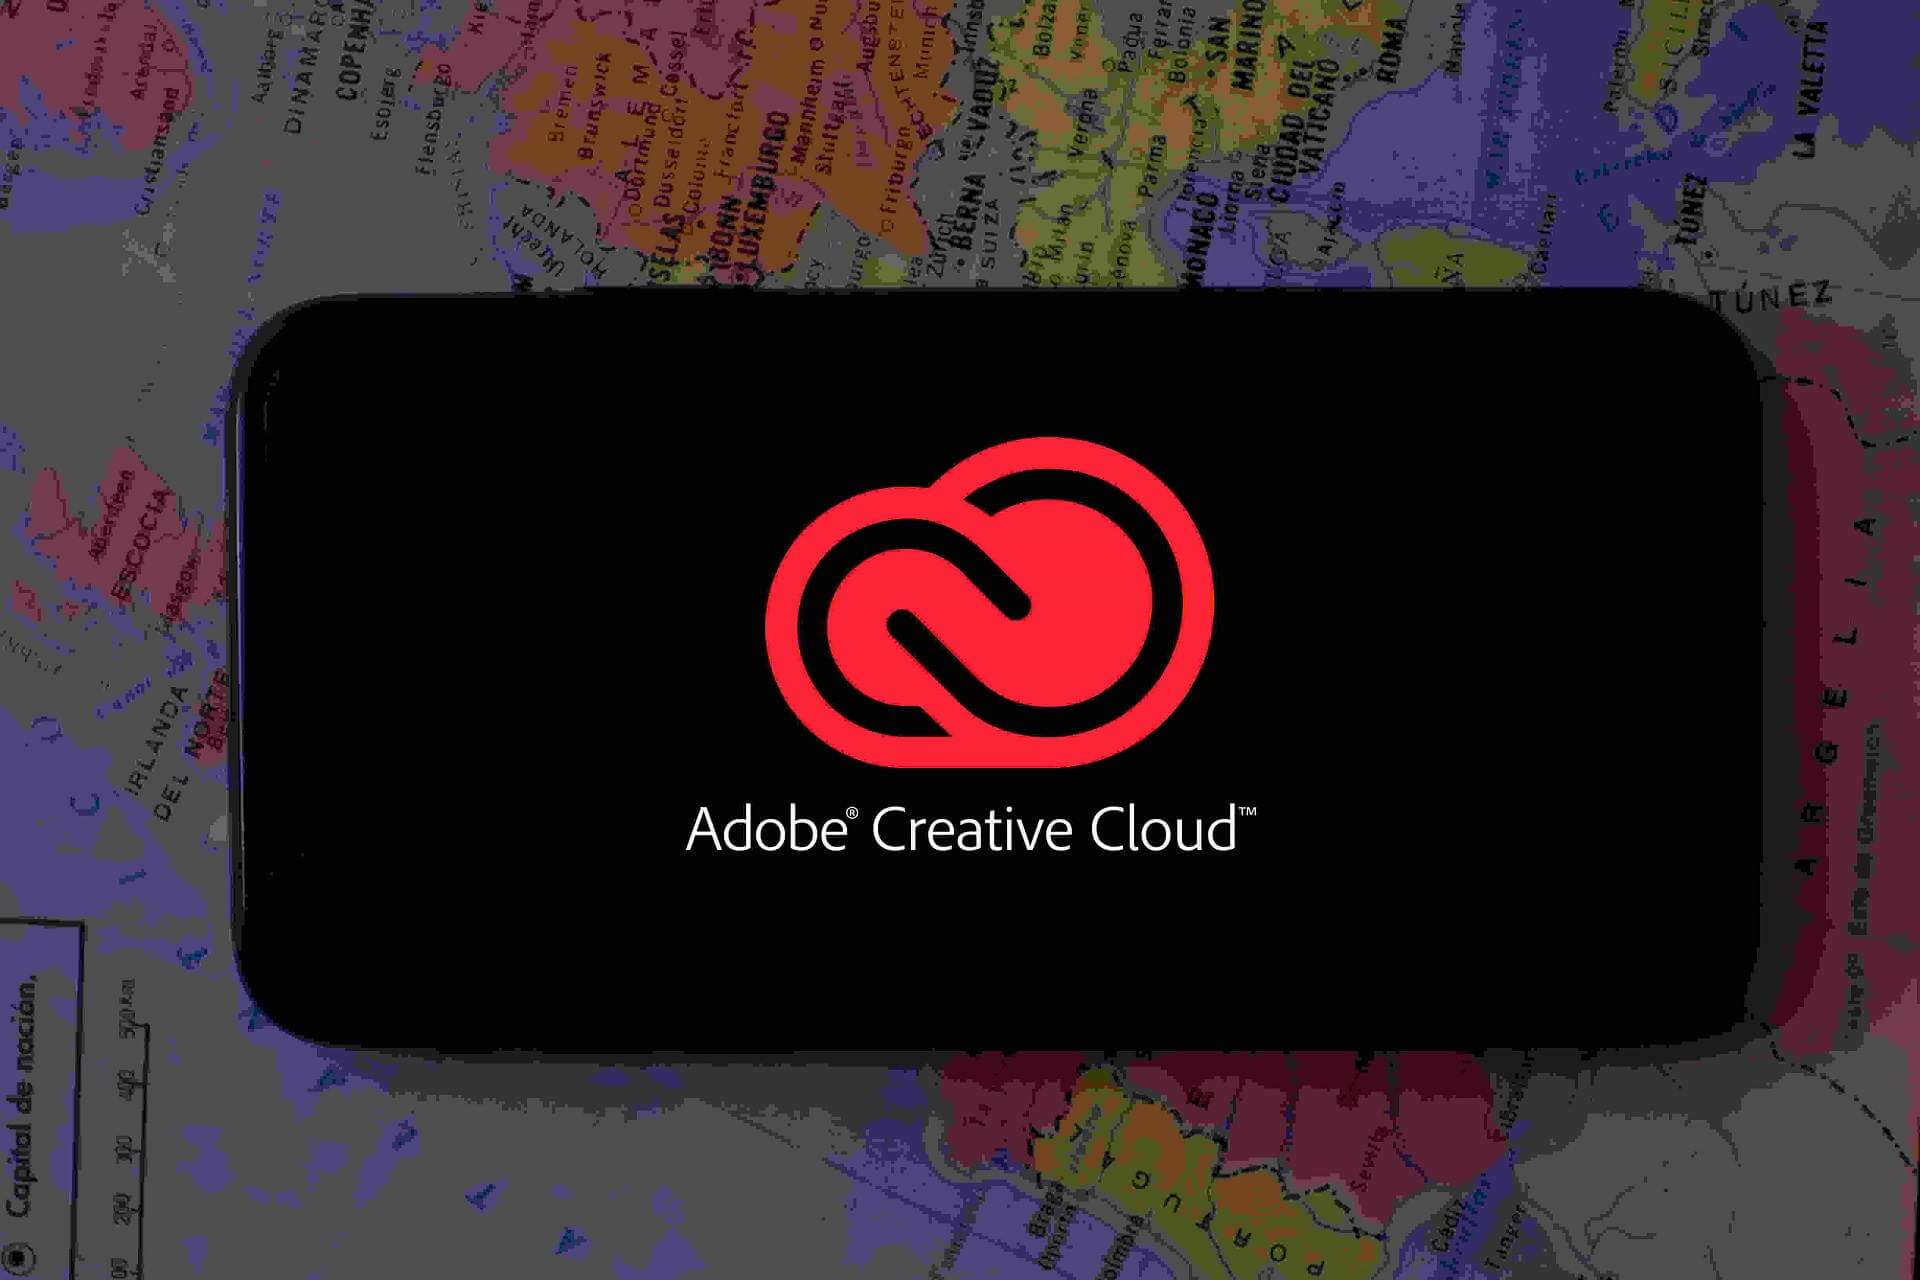 Number of omputers can I install my Creative Cloud apps on